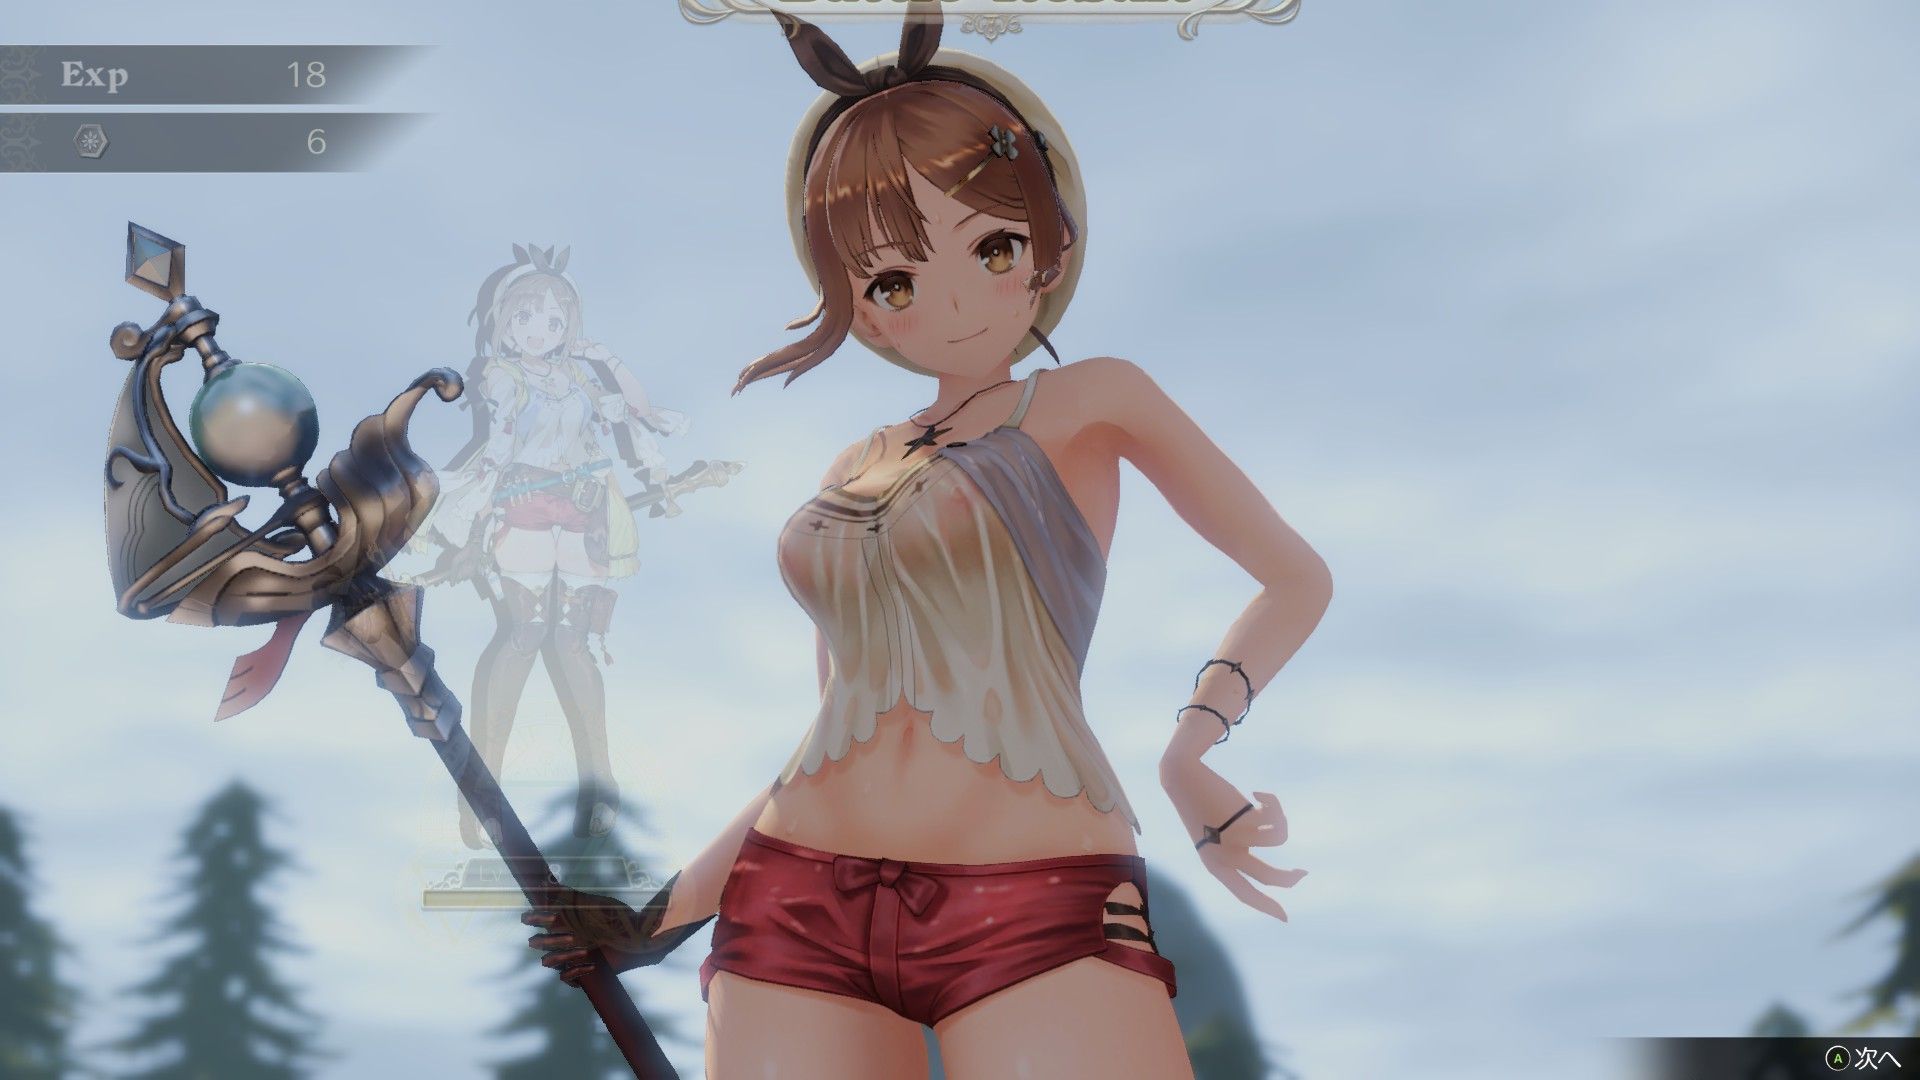 Buy a PC version liza atelier but also spend 2 days to make nipples transparent with erotic MOD ... 15